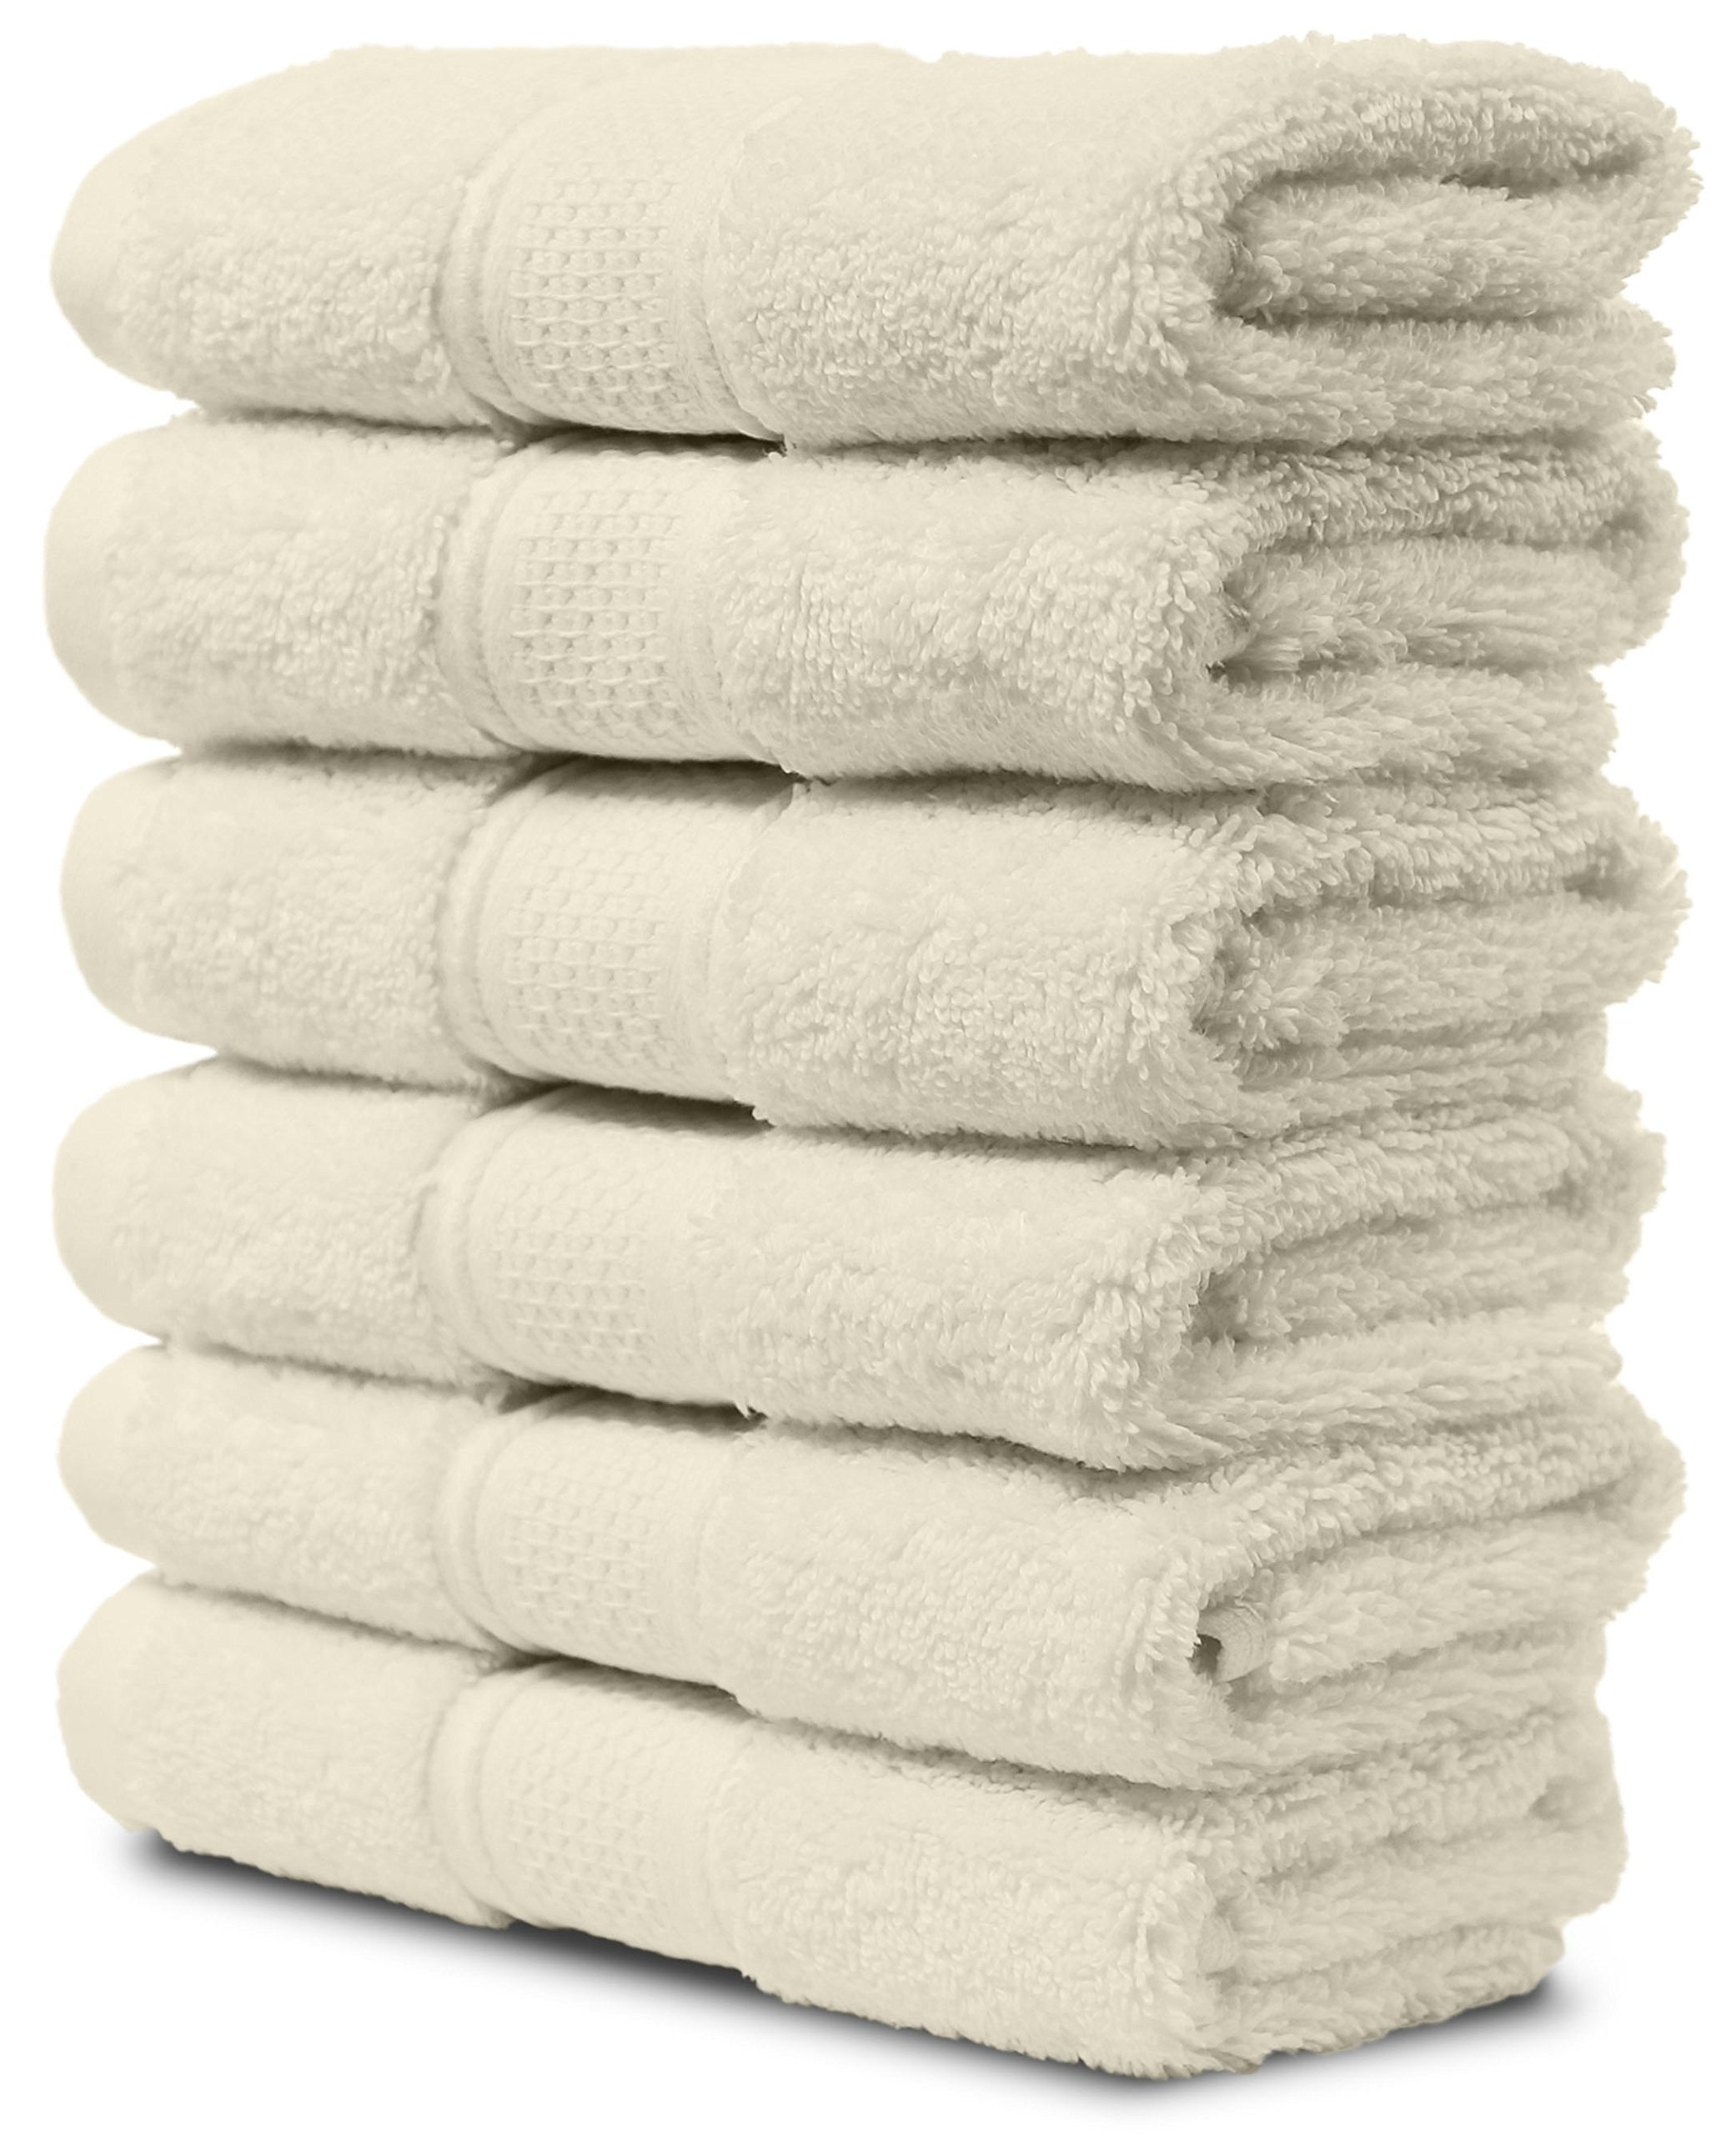 Book Cover Maura Luxurious Turkish Washcloth Set 6 Pack - Soft, Thick, Plush & Super Absorbent Premium Hotel & Spa Quality Oversized Cotton Face Towels. Enhance Your Bathroom - Cream Washcloth (6-Pack) Cream